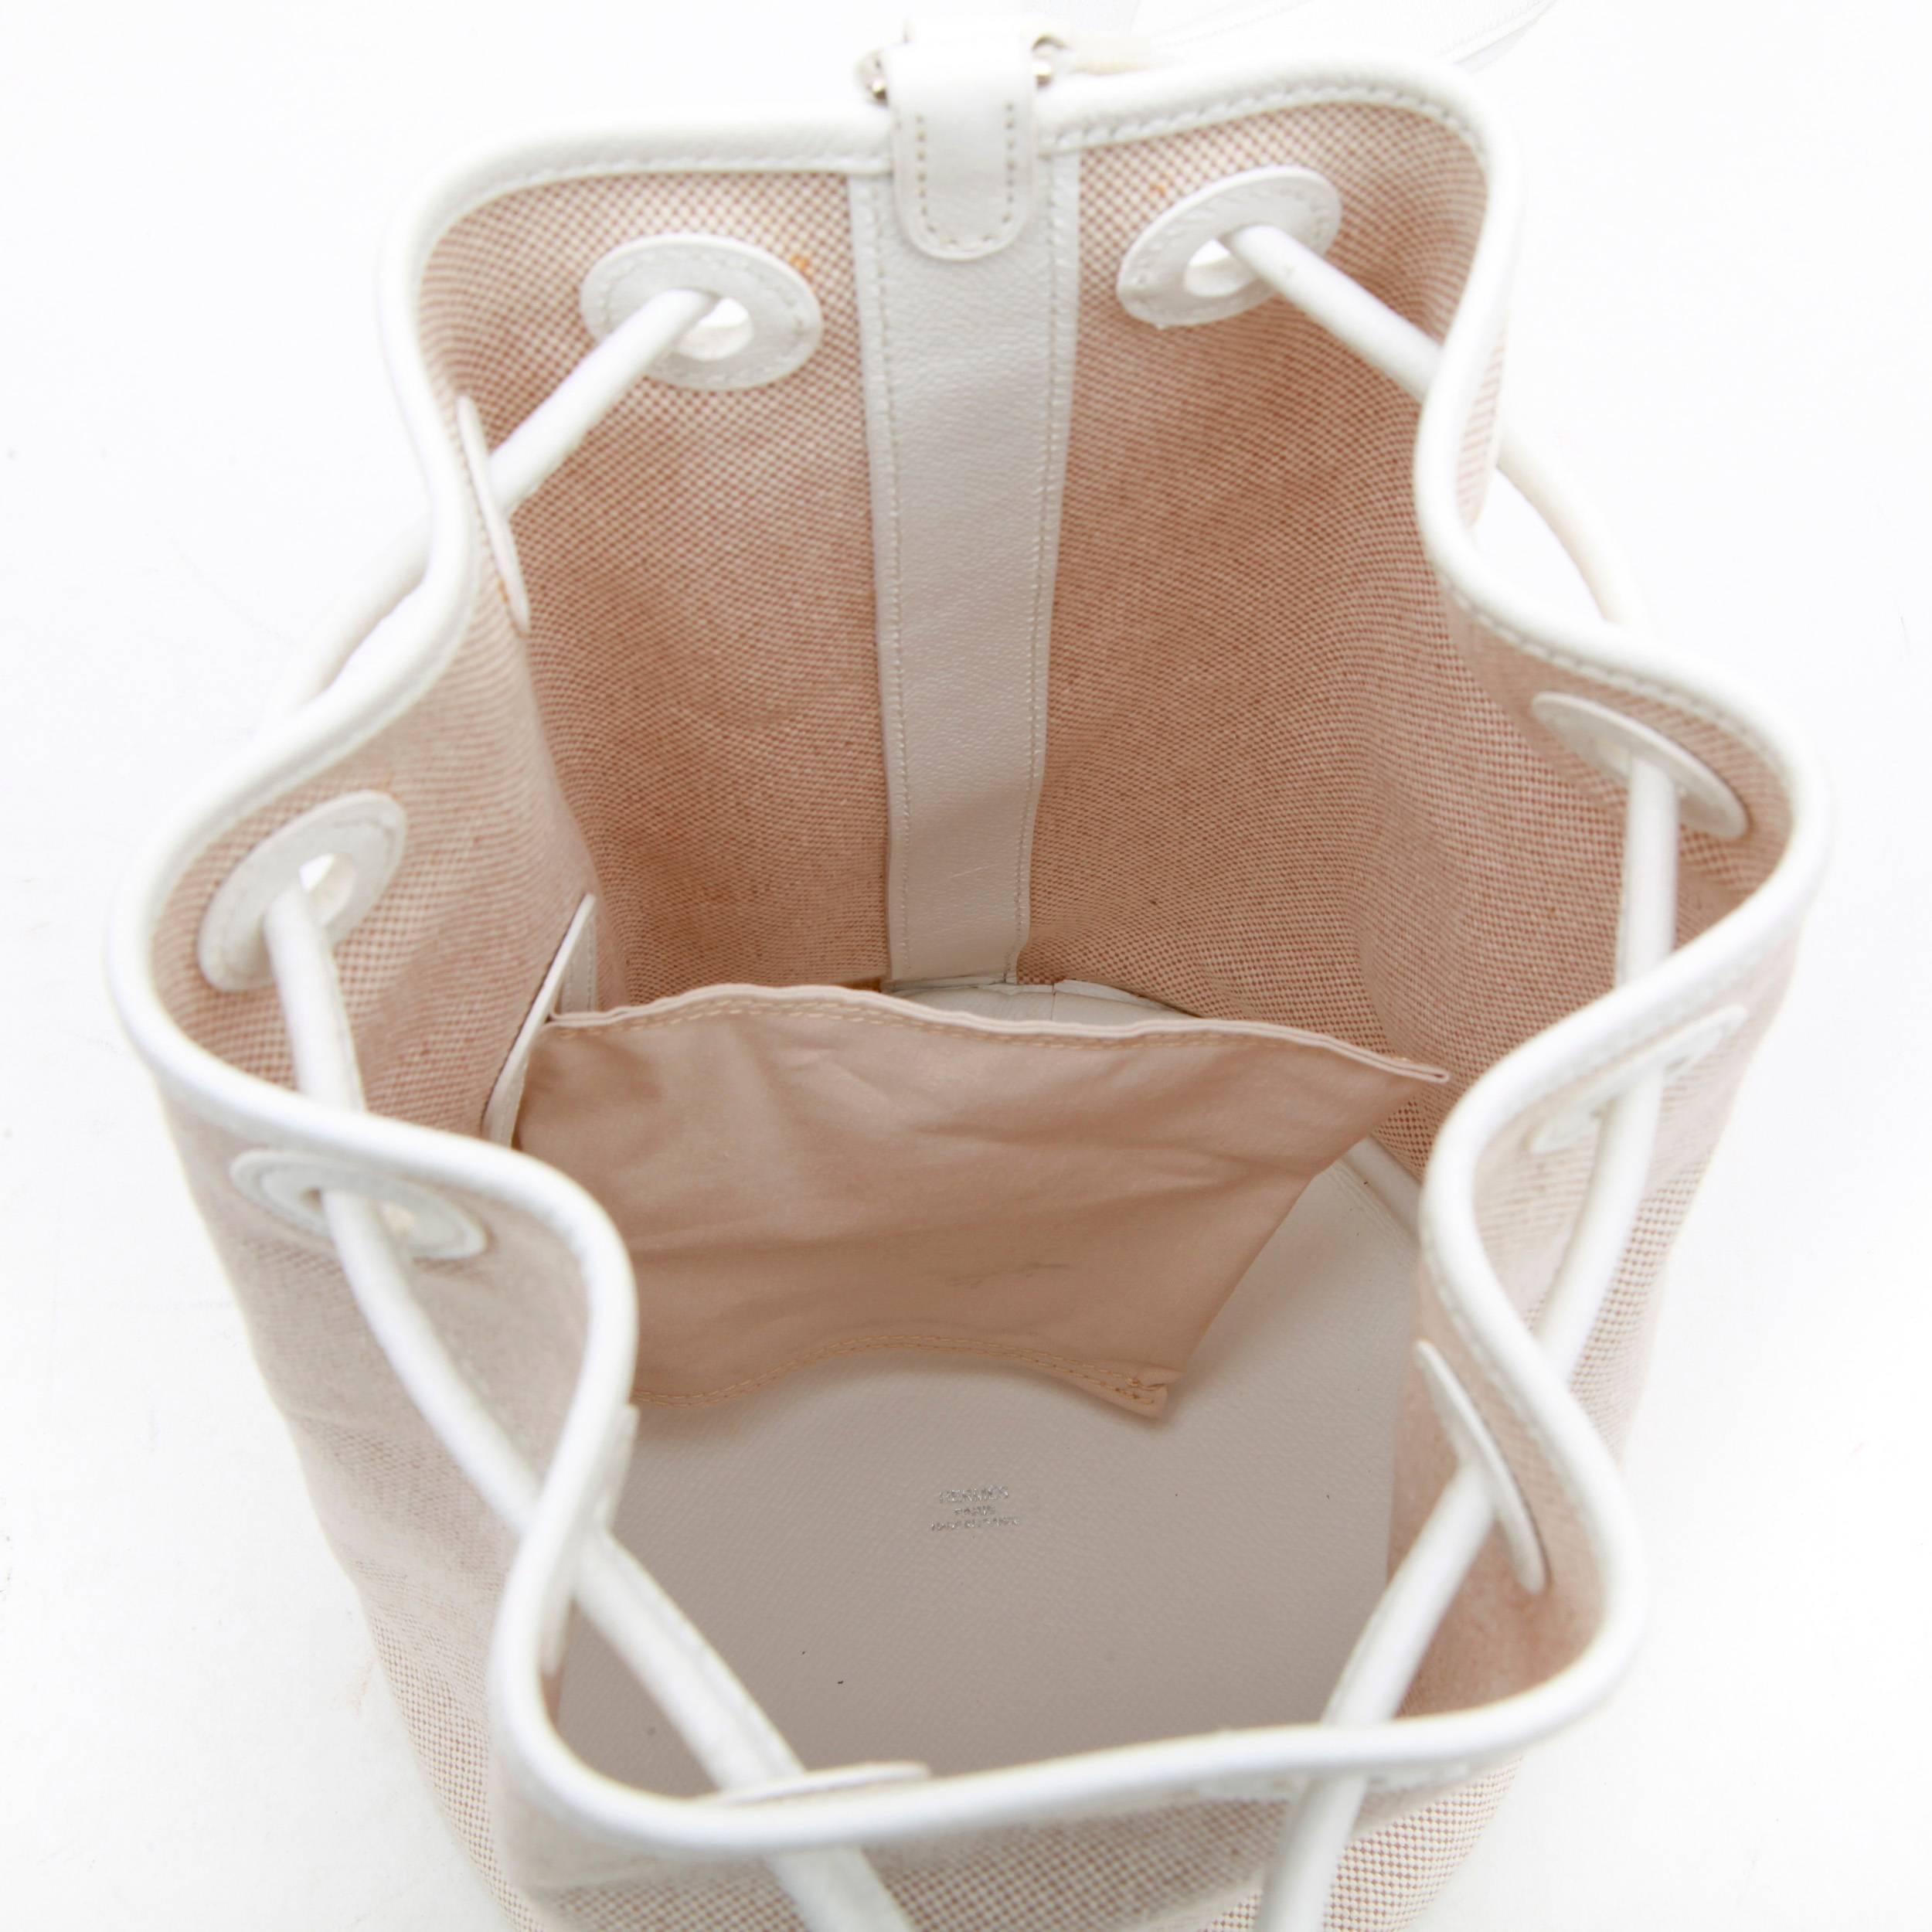 Women's HERMES Bucket Bag in White Canvas and Leather